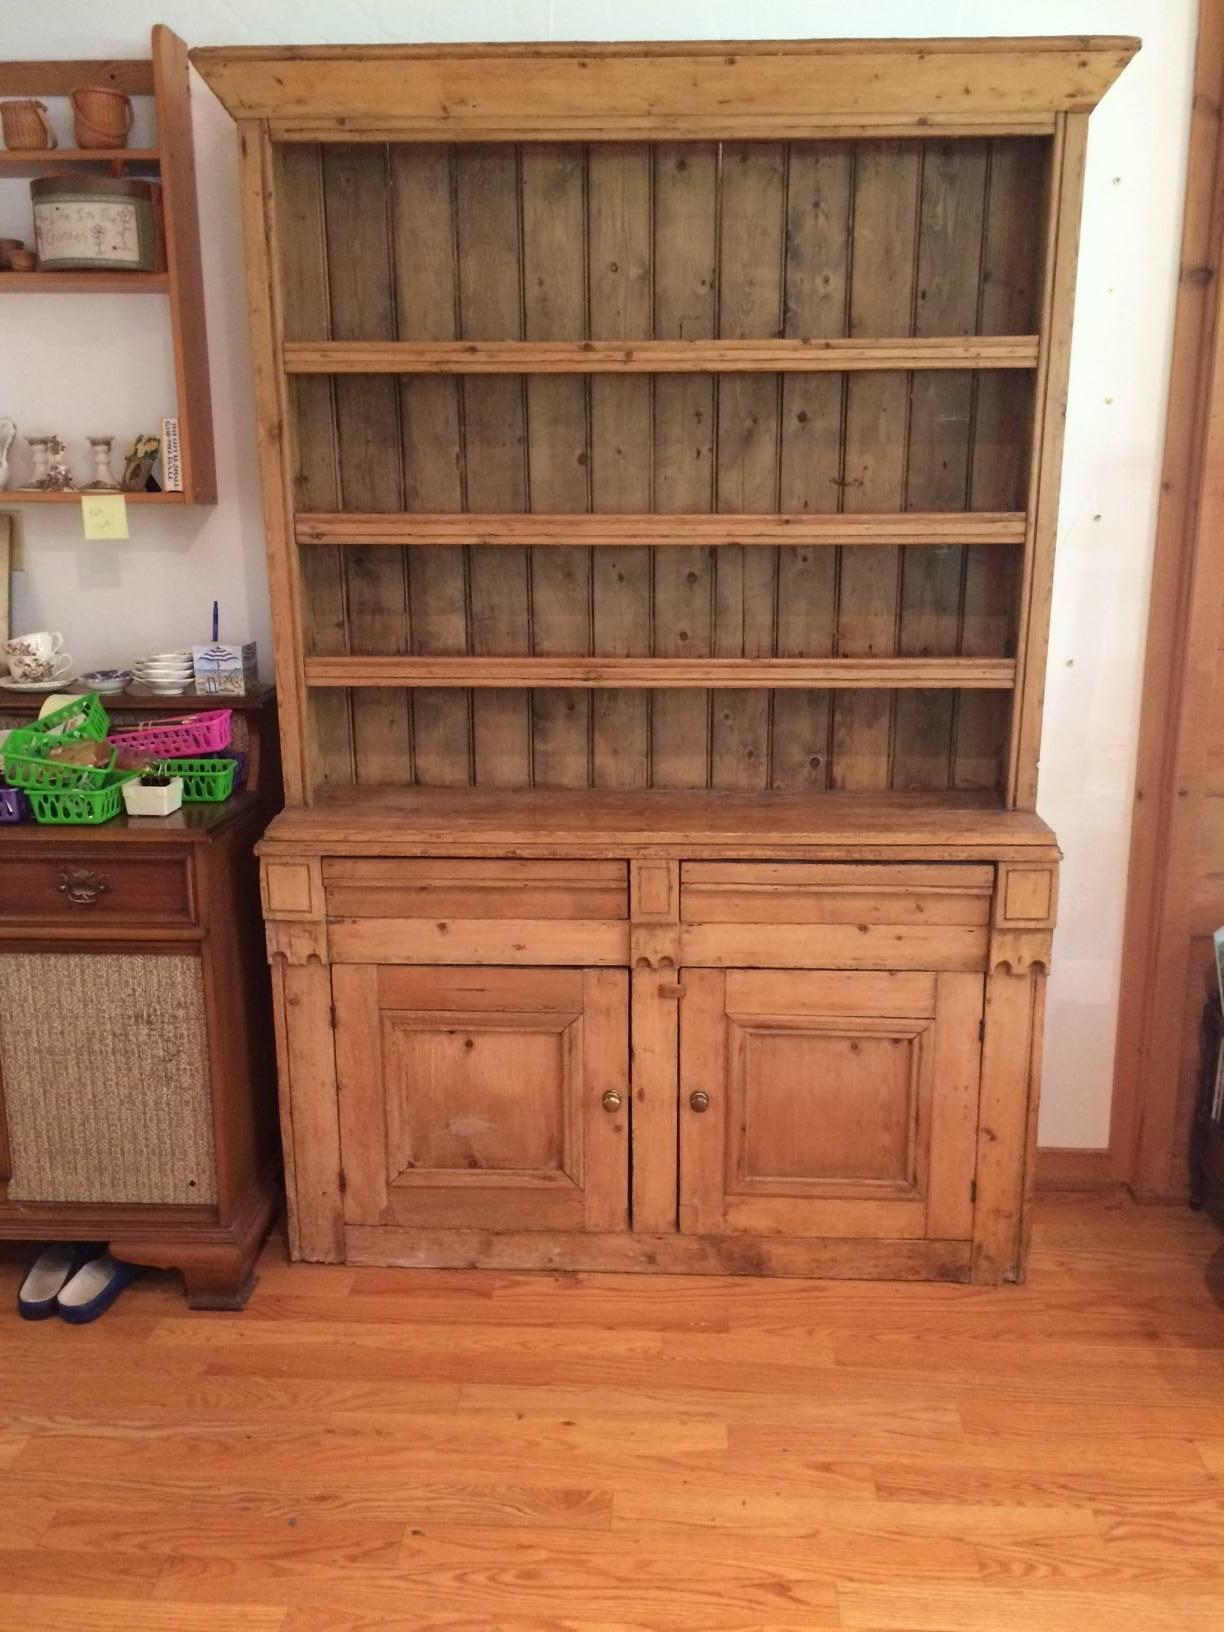 This antique old hutch conjures up Vermont in the early 1900s, having gorgeous old wood, three shelves and ample surface for display, two panel doors on the lower area with storage and two drawers in between the sections.
Measures: 57